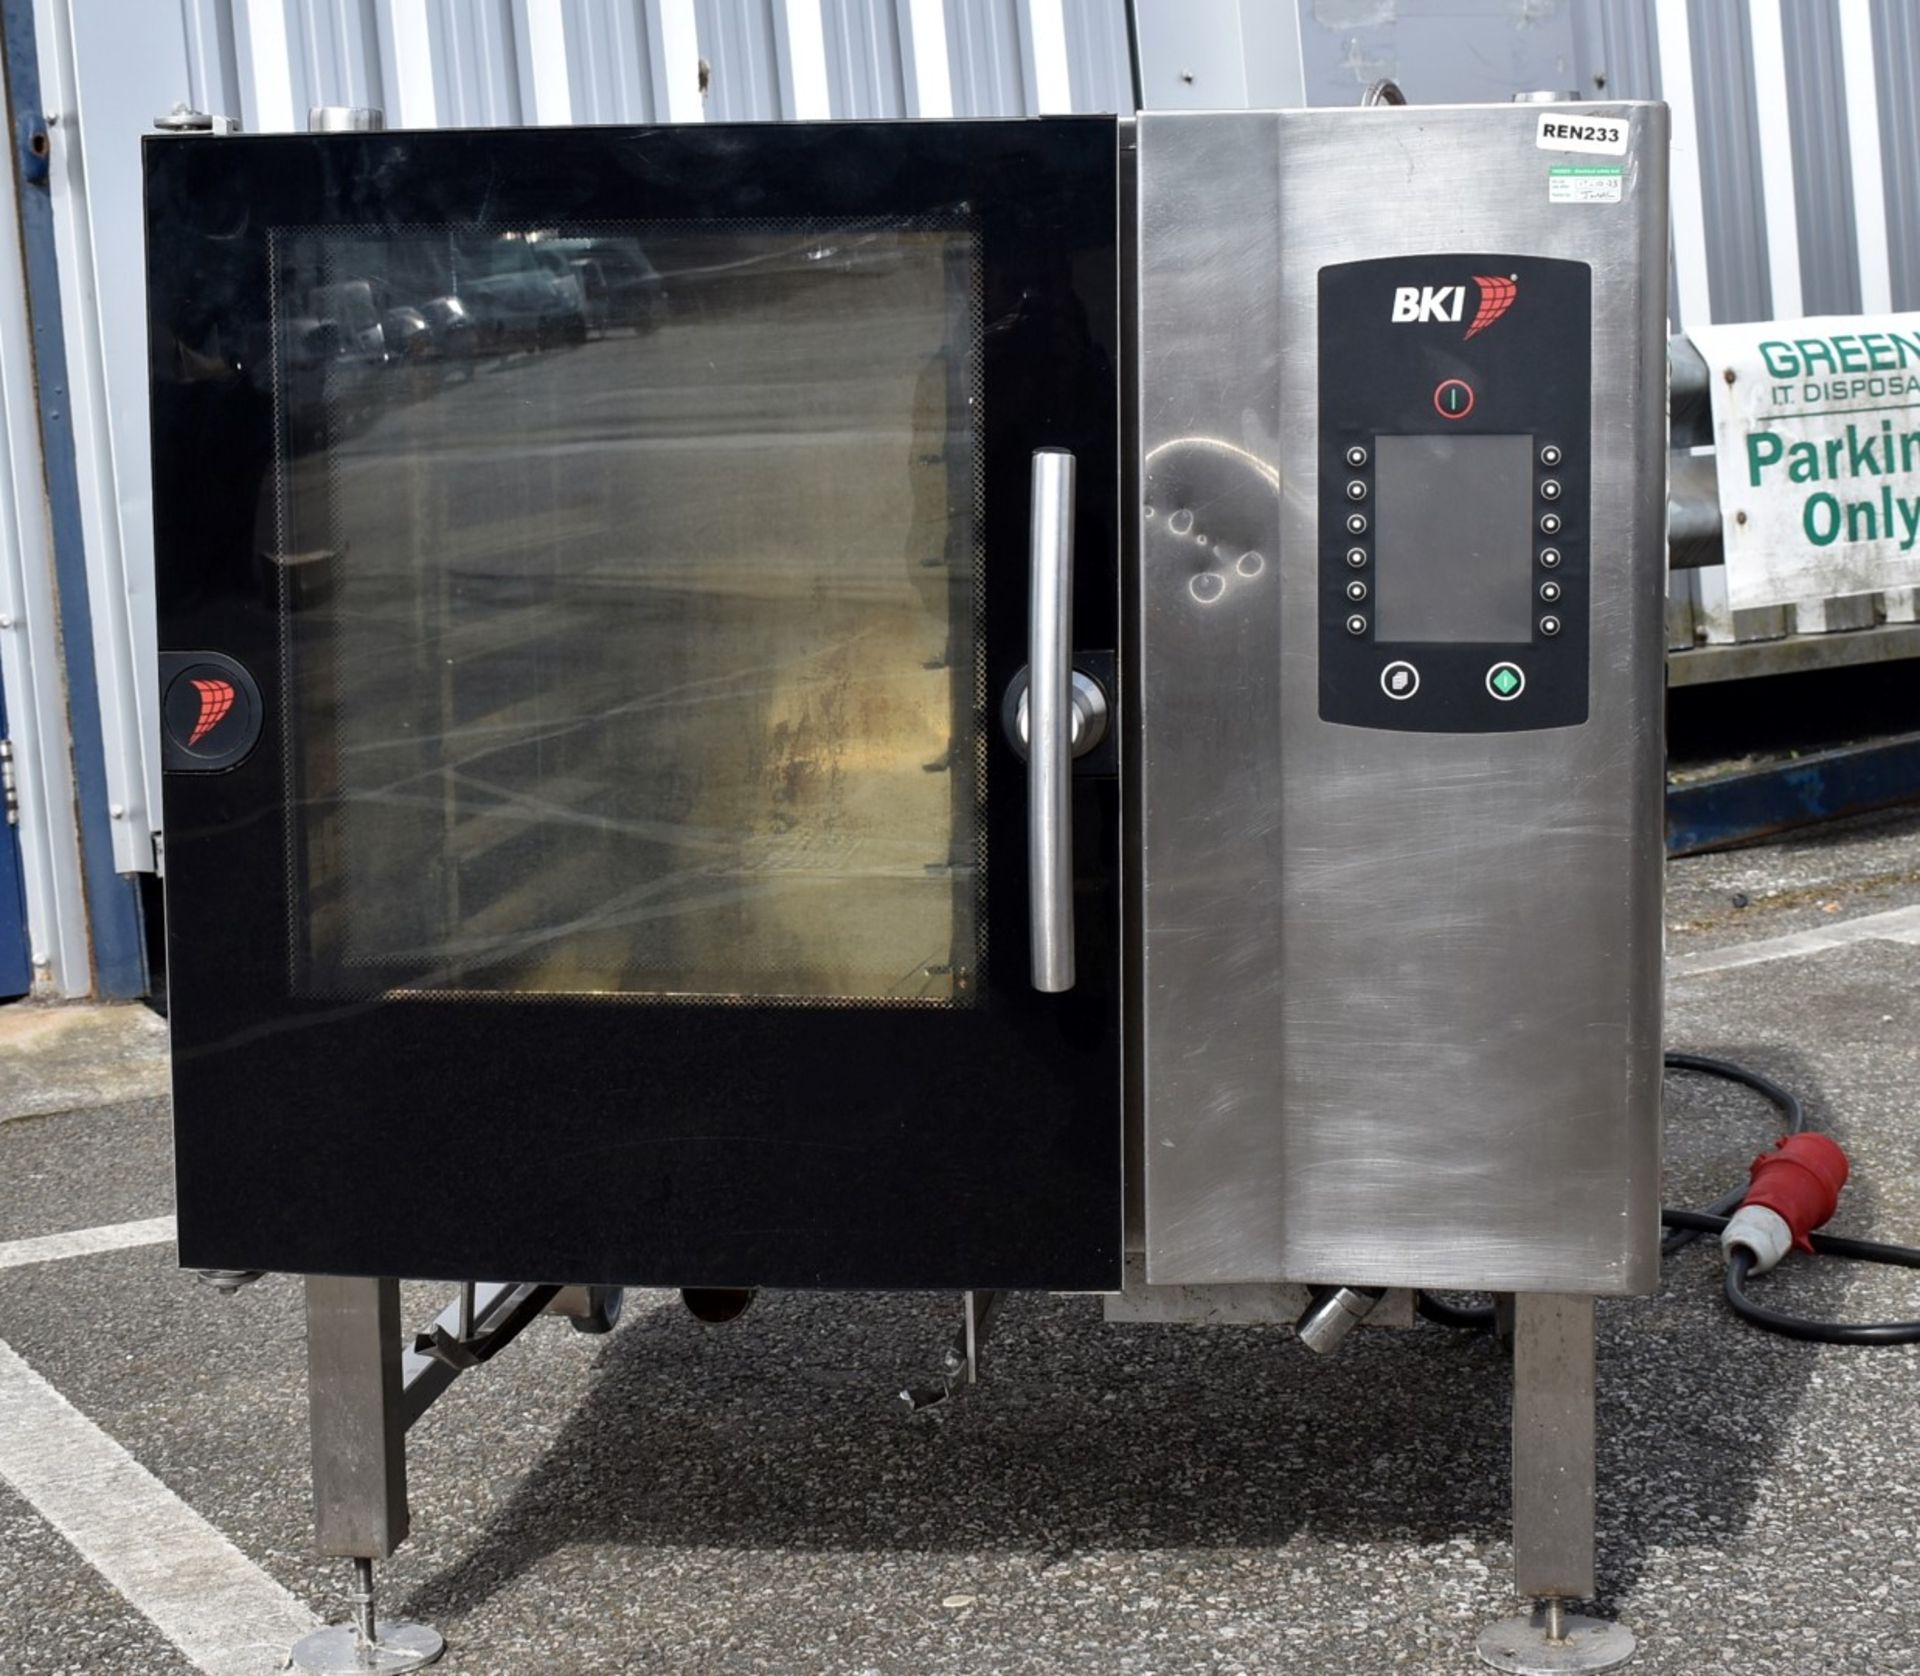 1 x Houno CPE 1.06 Electric Combi Oven - 3 Phase Combi Oven With Various Pre-Set Cooking Options - Image 2 of 10